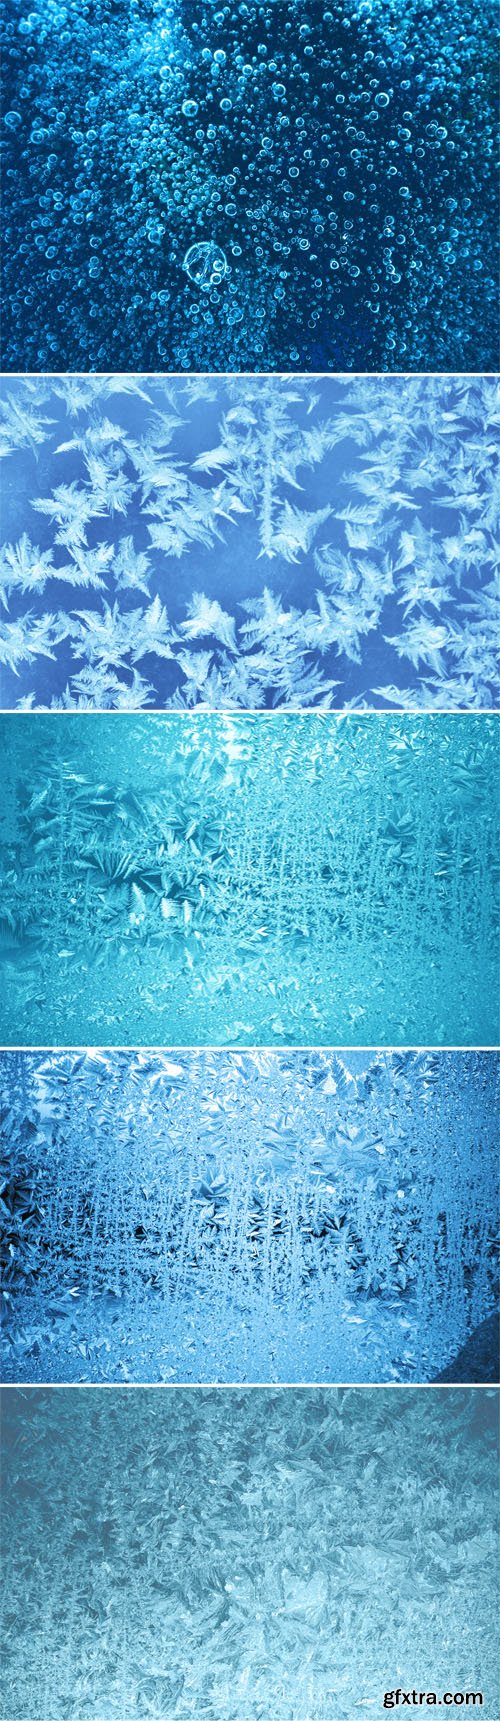 Ice Patterns for Photoshop + Textures